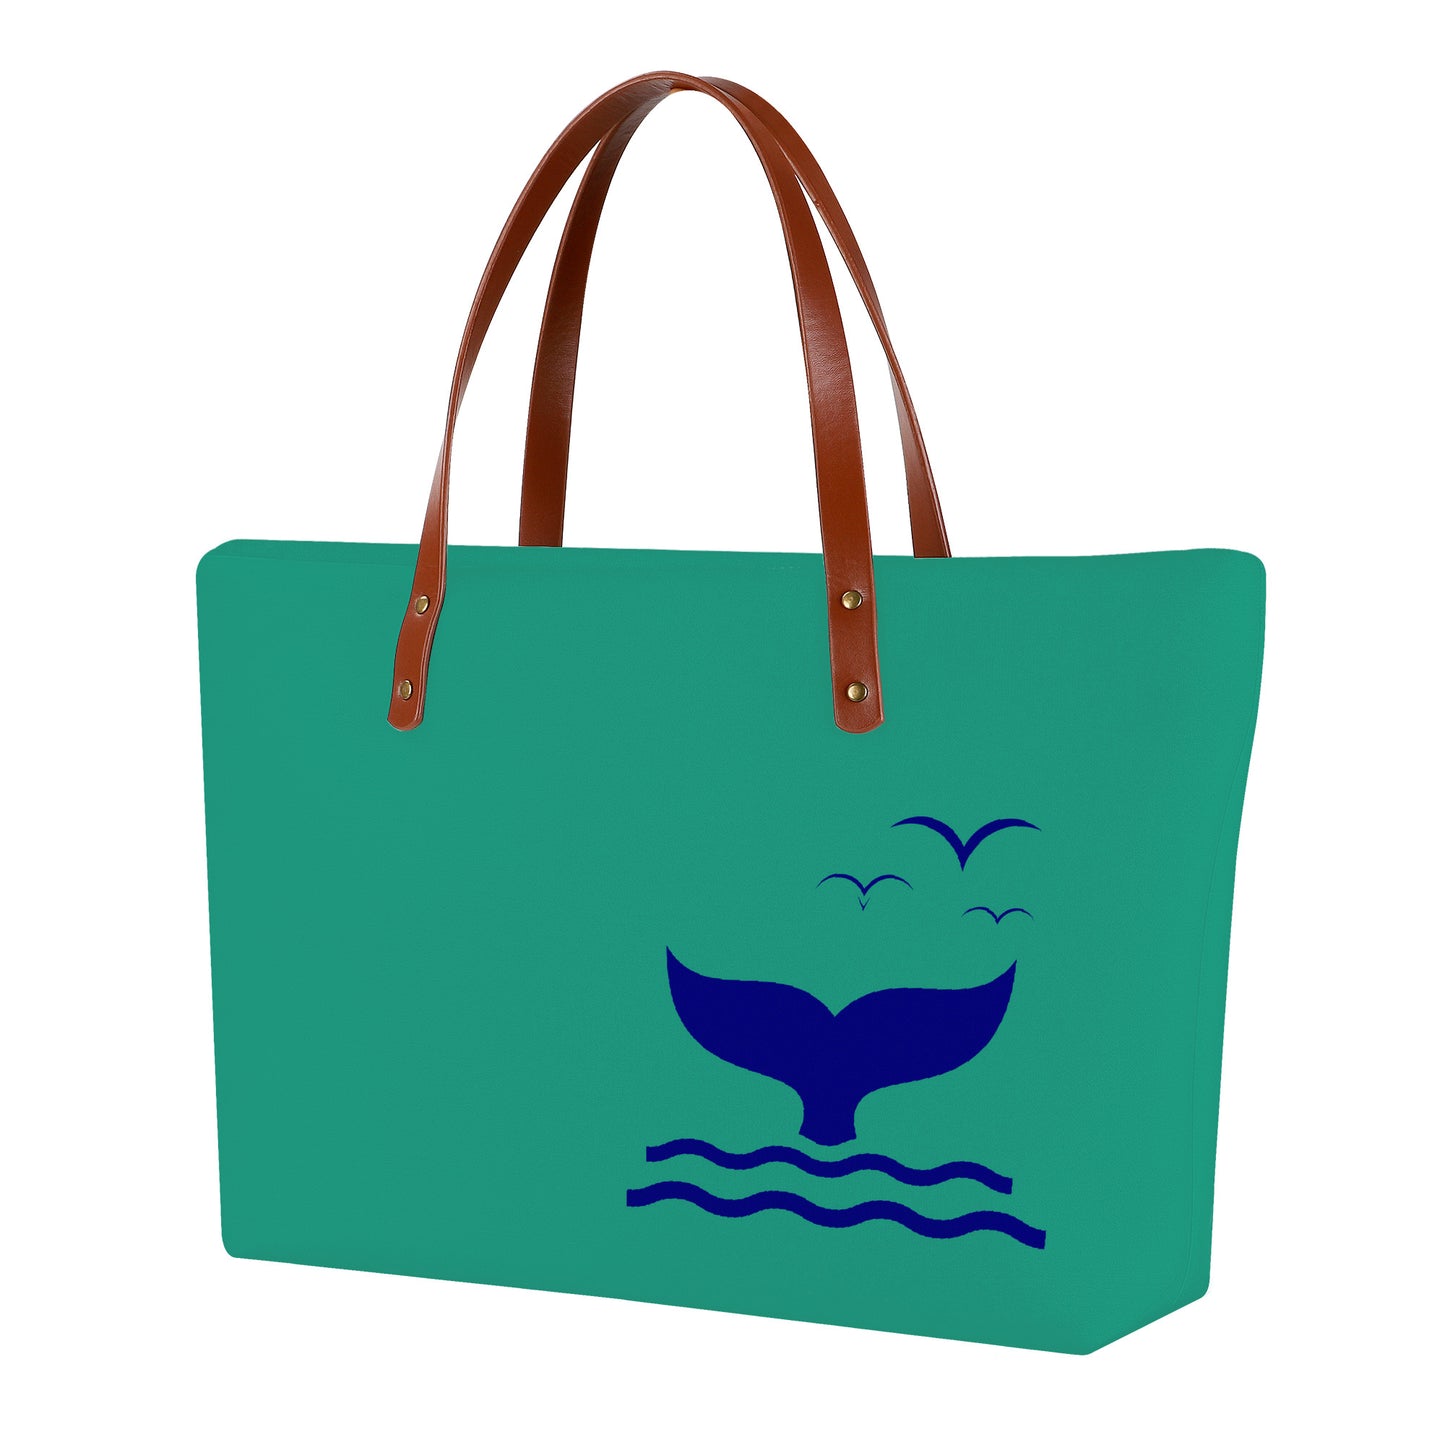 Whales Tail - Everyday Tote Bag